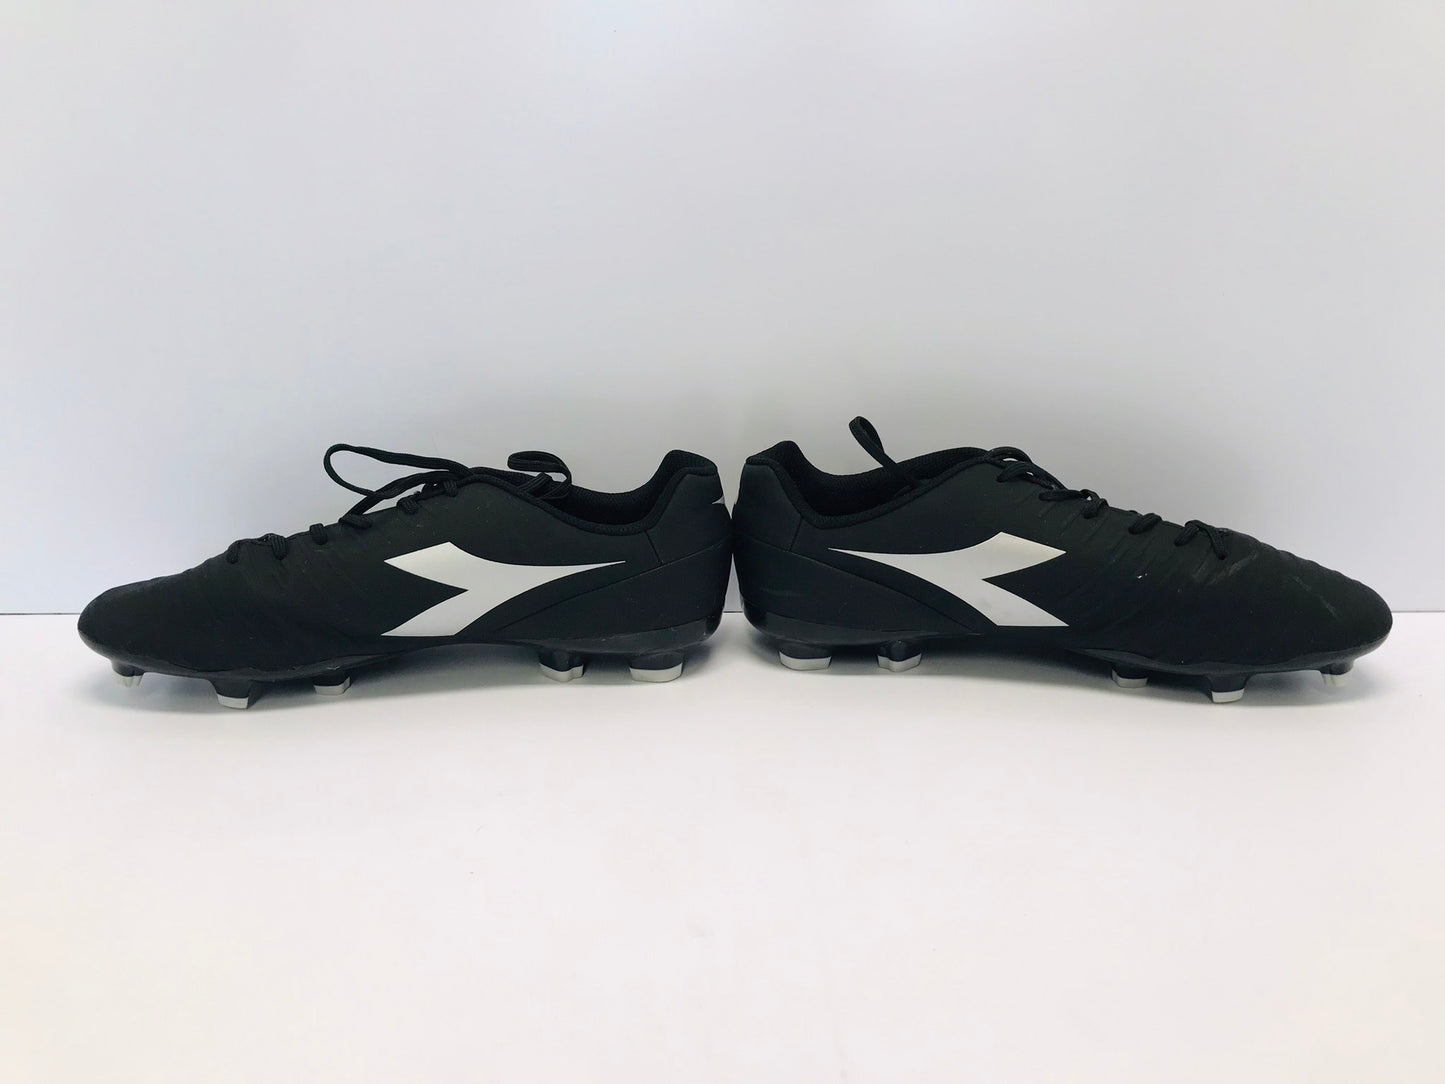 Soccer Shoes Cleats Men's Size 11 Adidas Black Silver Like New